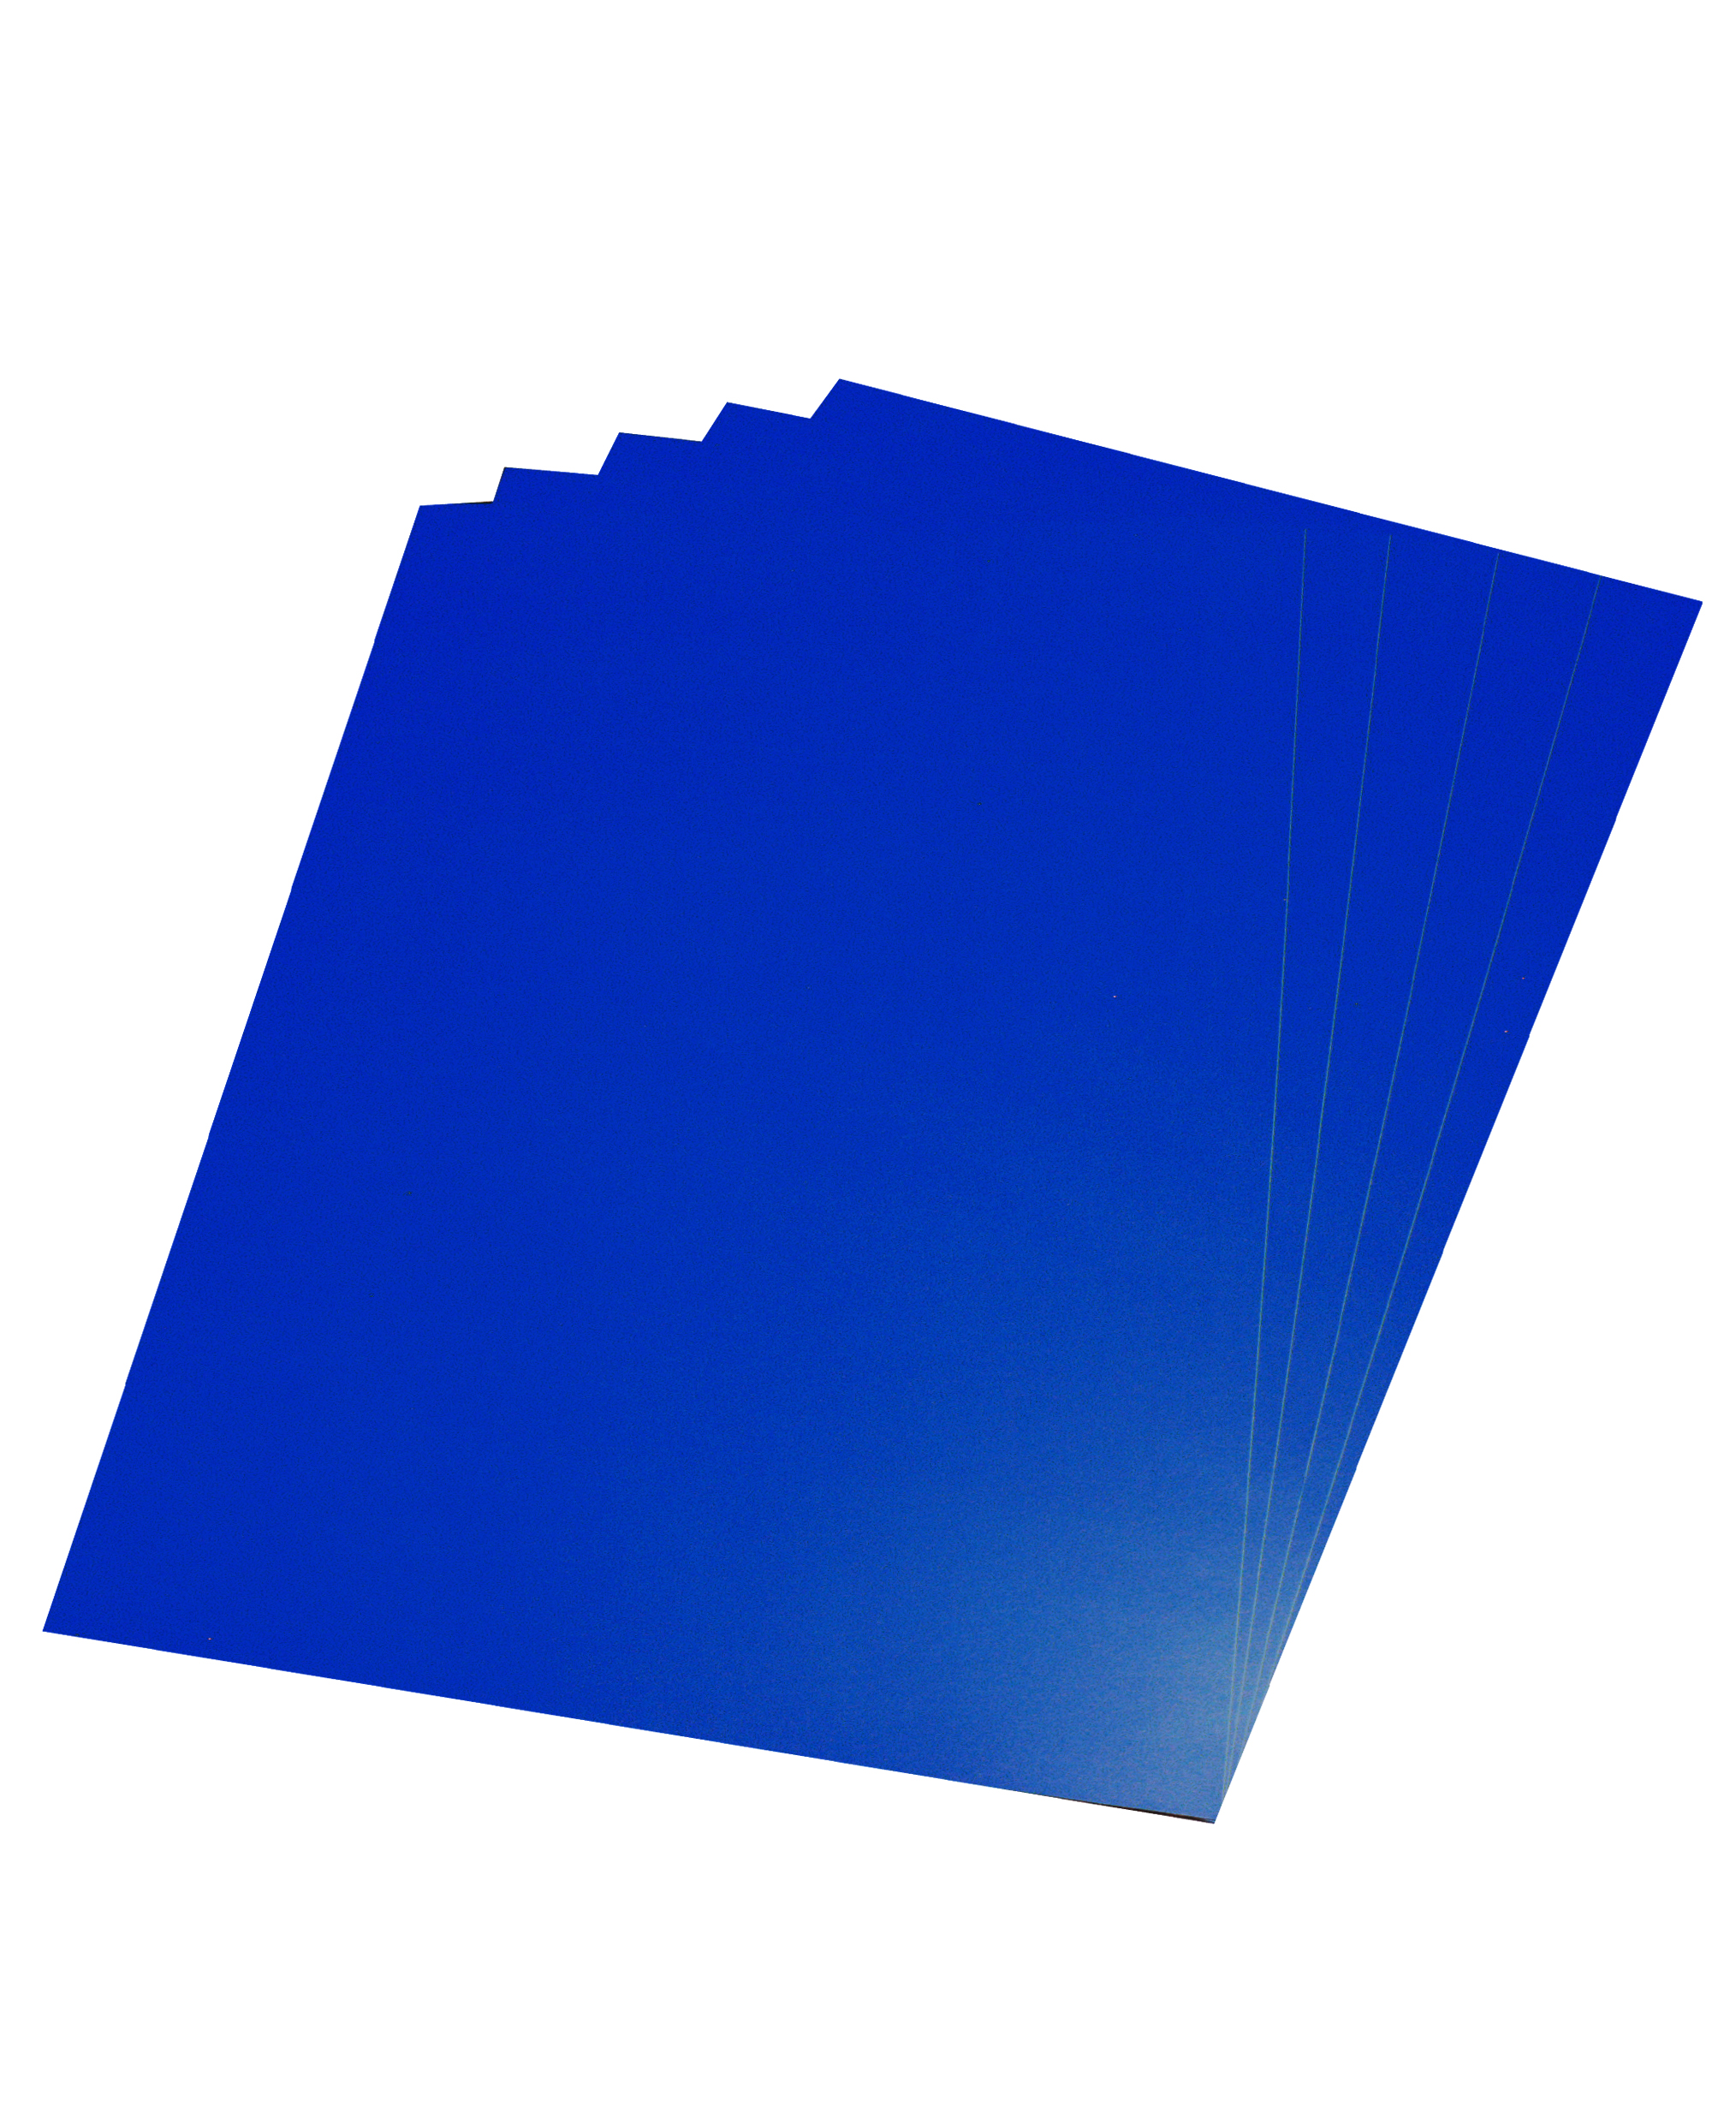 Uoffice Fluorescent Poster Board,25.5 inch x 19 inch, Blue, Size: 1-Pack